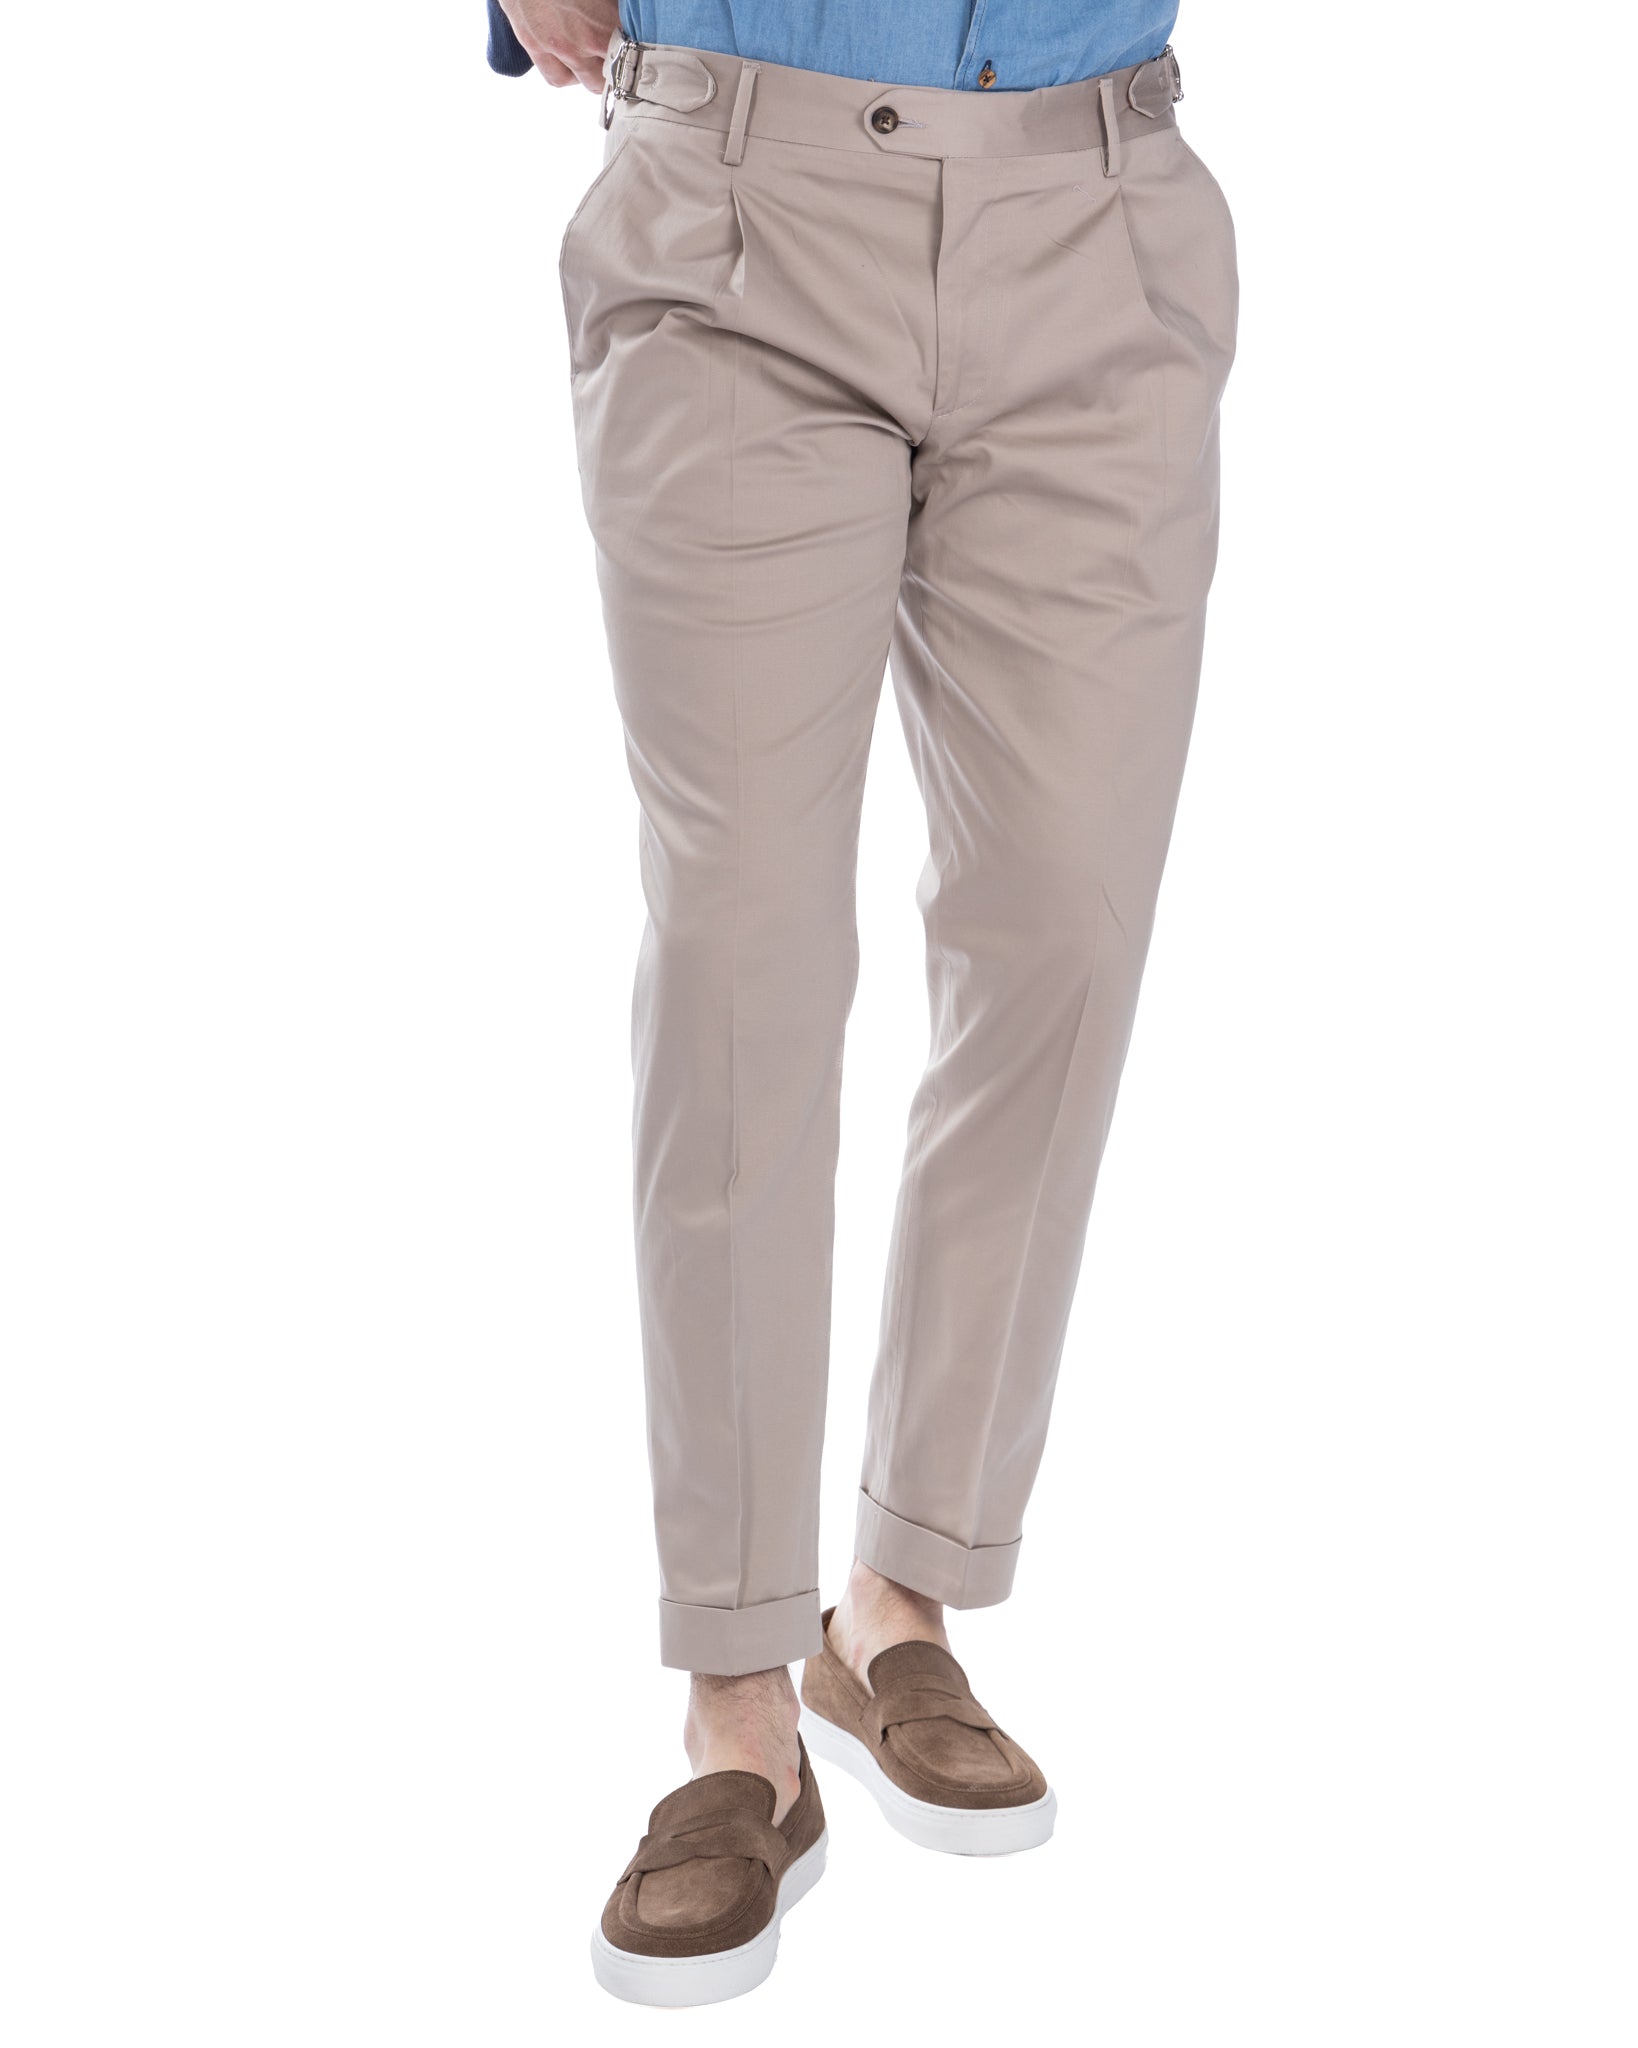 James - beige high-waisted trousers with buckles